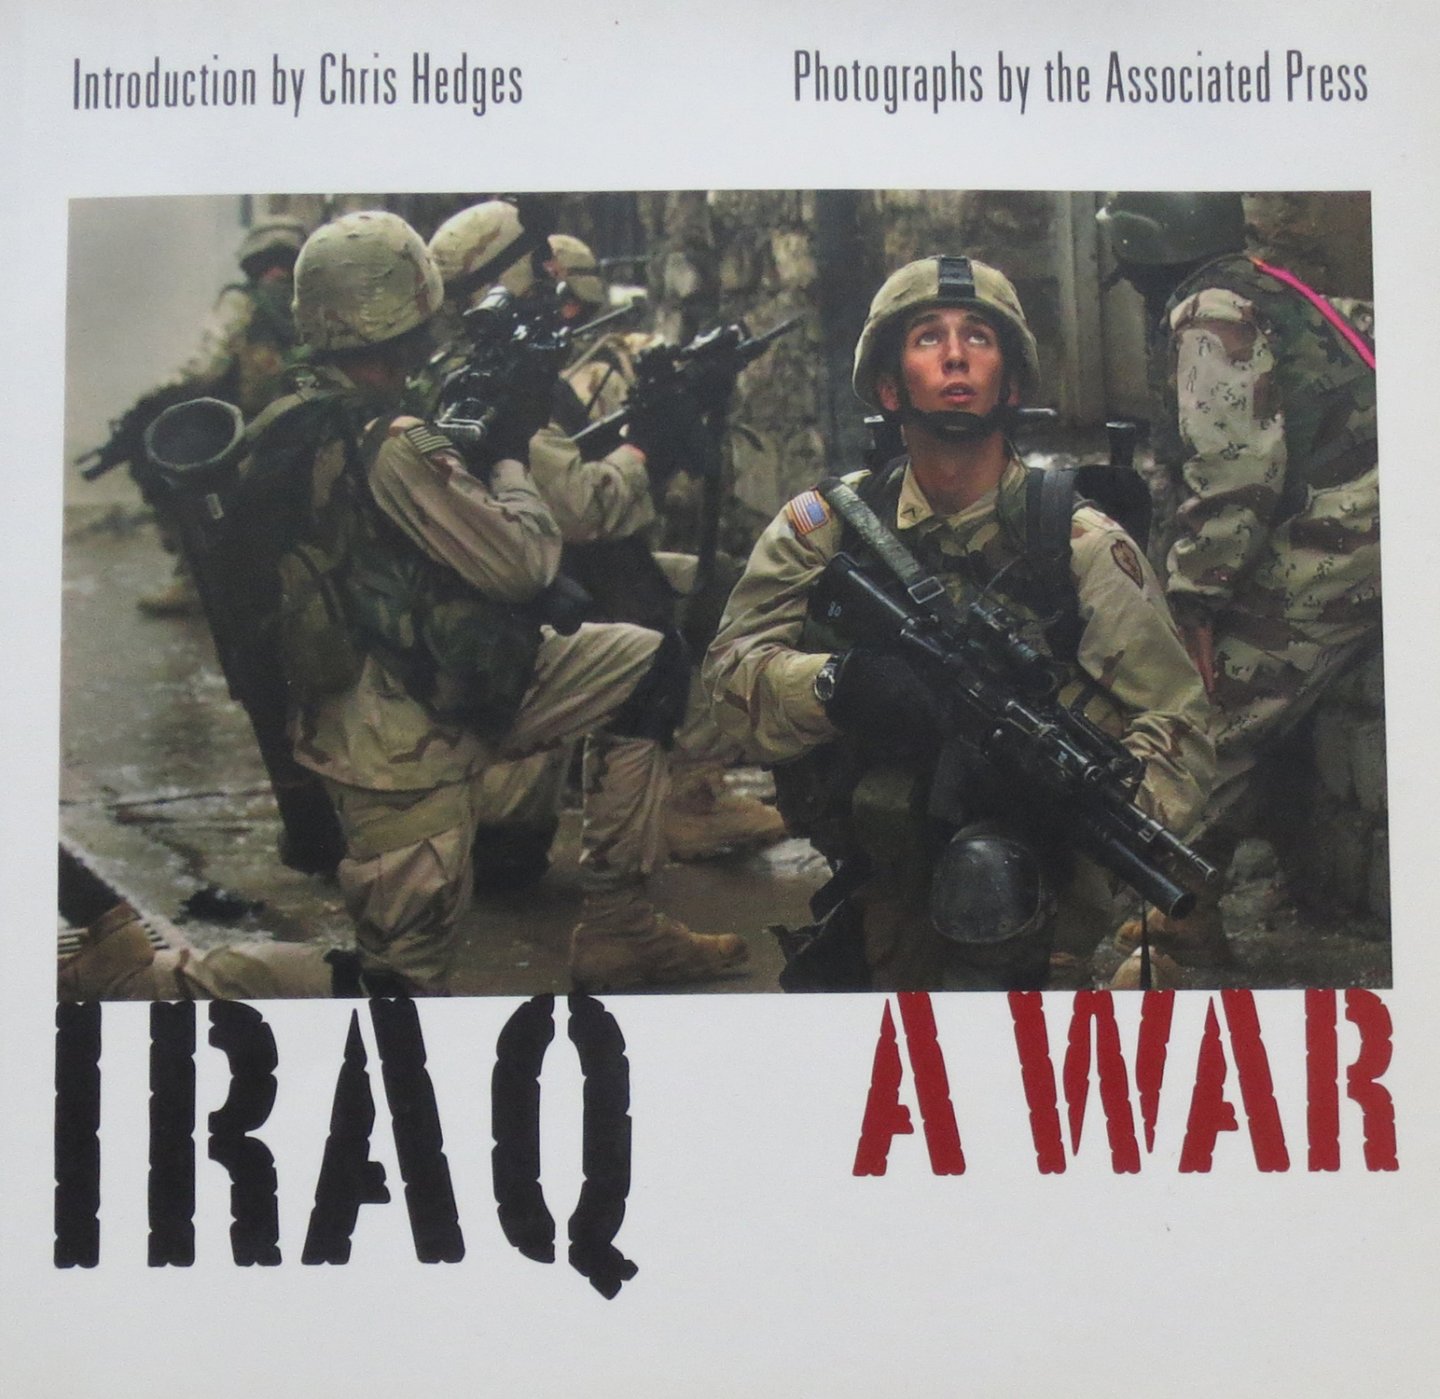 Hedges, Chris (Introduction - Iraq A War Photographs  by the Associated Press